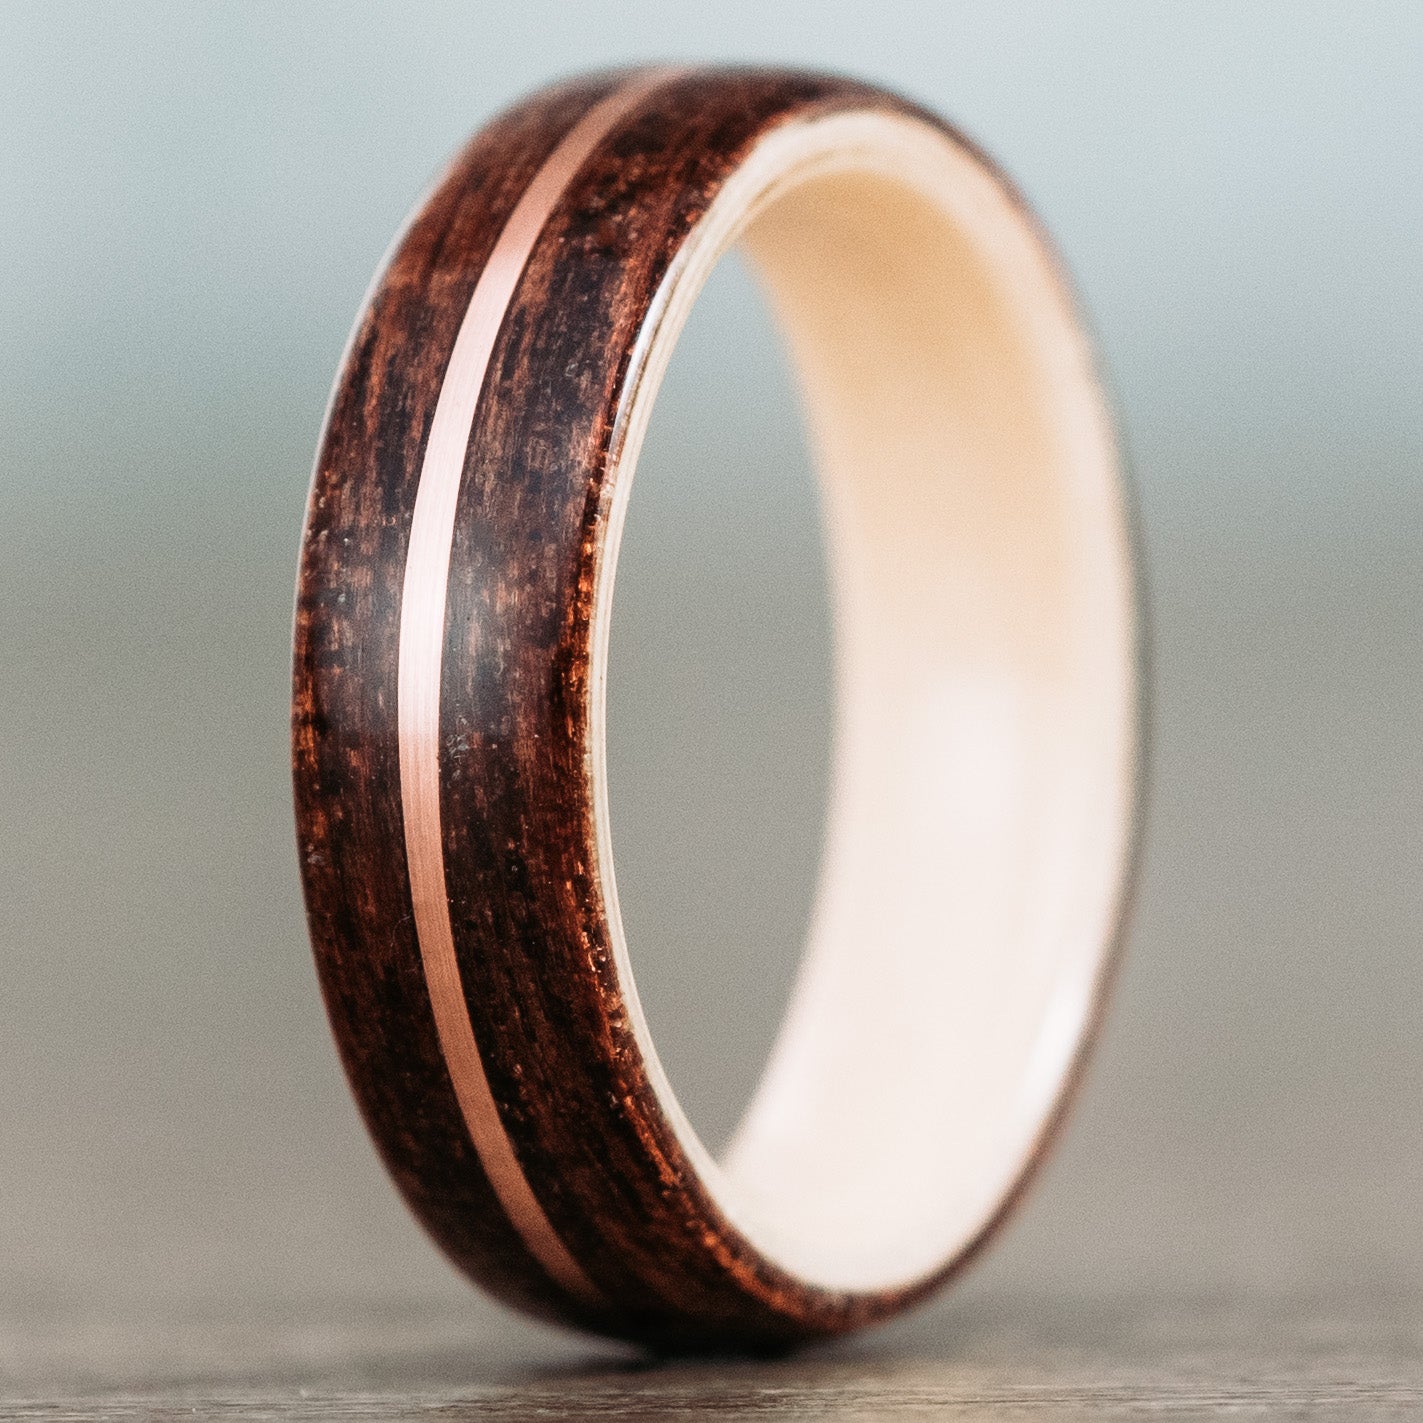 The Laura | Women's Walnut Wood Leather Ring with Holly Liner & Metal Inlay | Rustic and Main